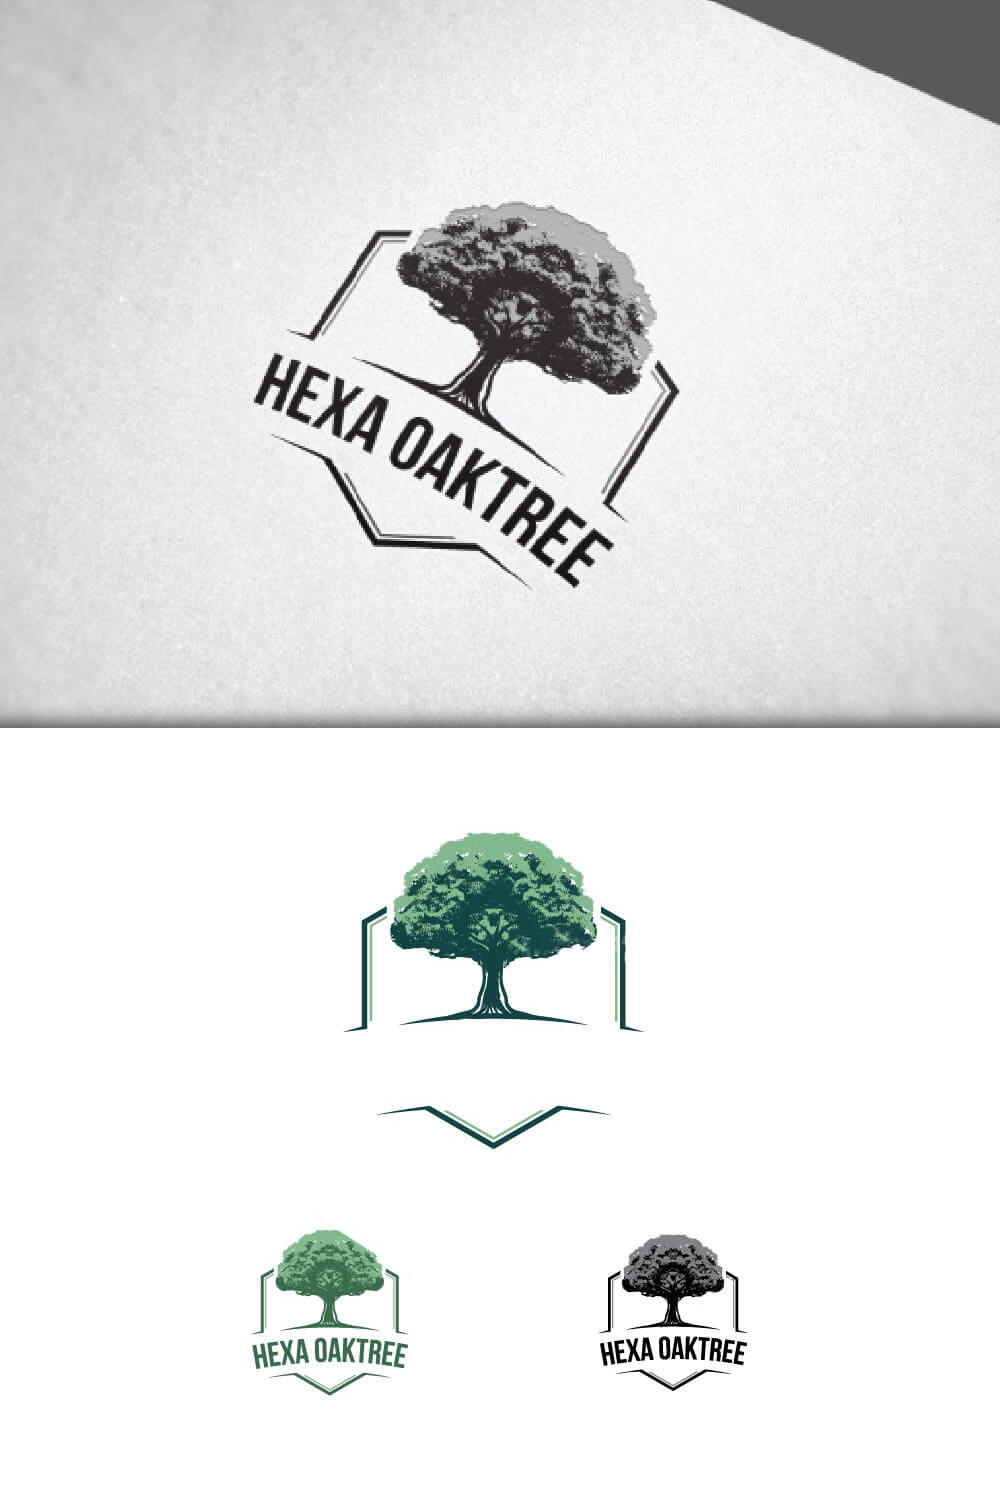 The top picture is with a gray hexa oaktree, below are two green trees and one grey.